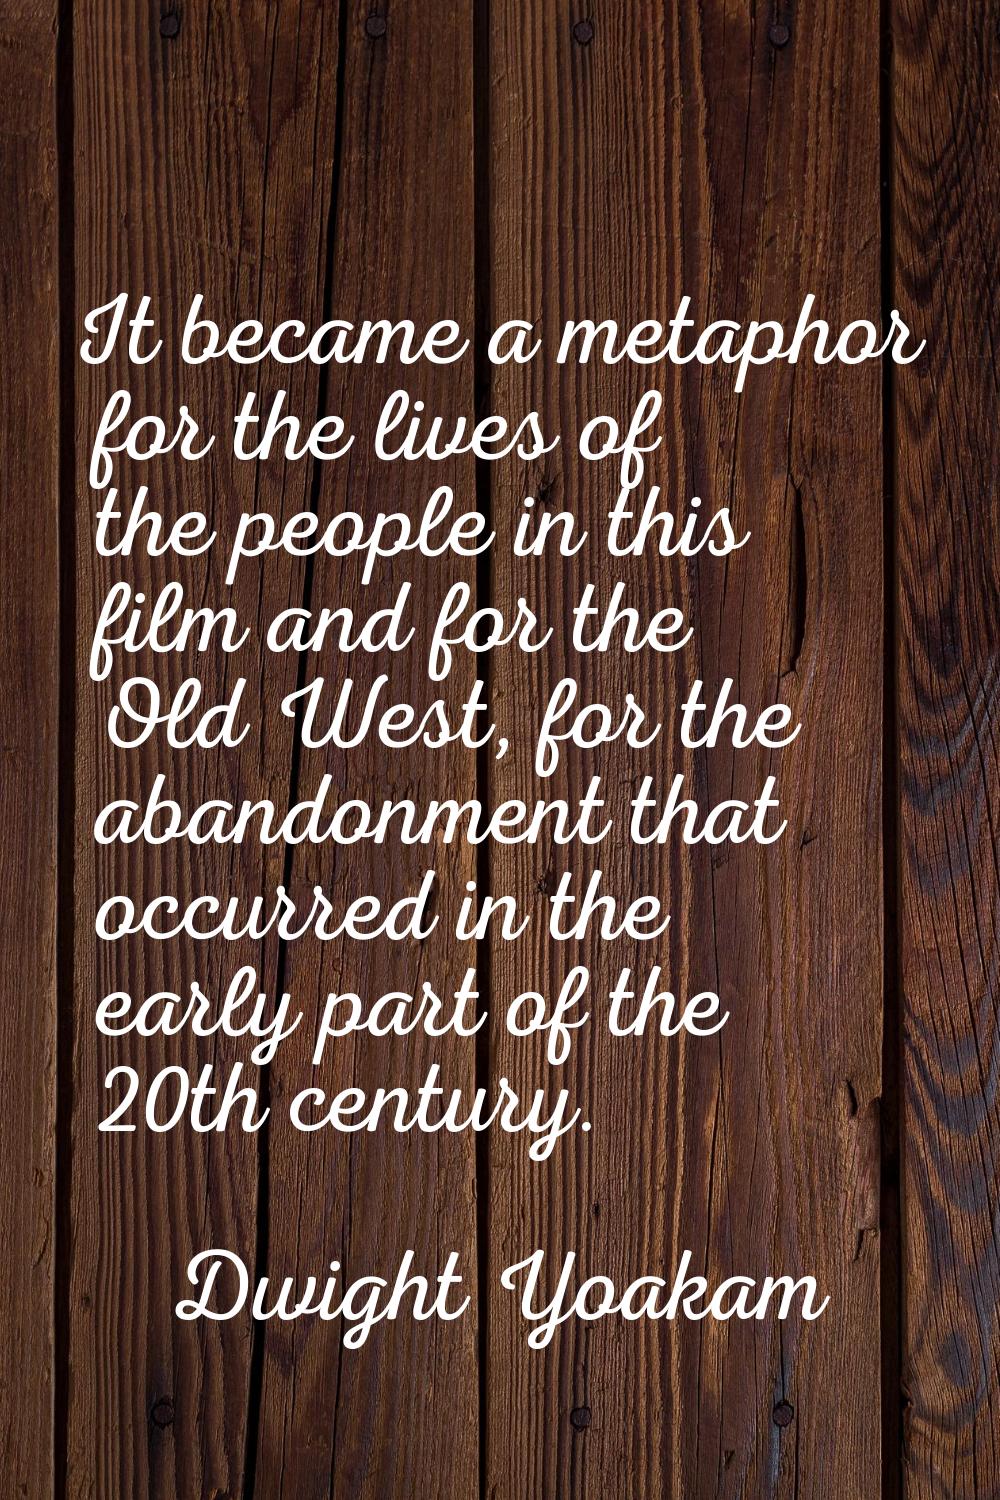 It became a metaphor for the lives of the people in this film and for the Old West, for the abandon